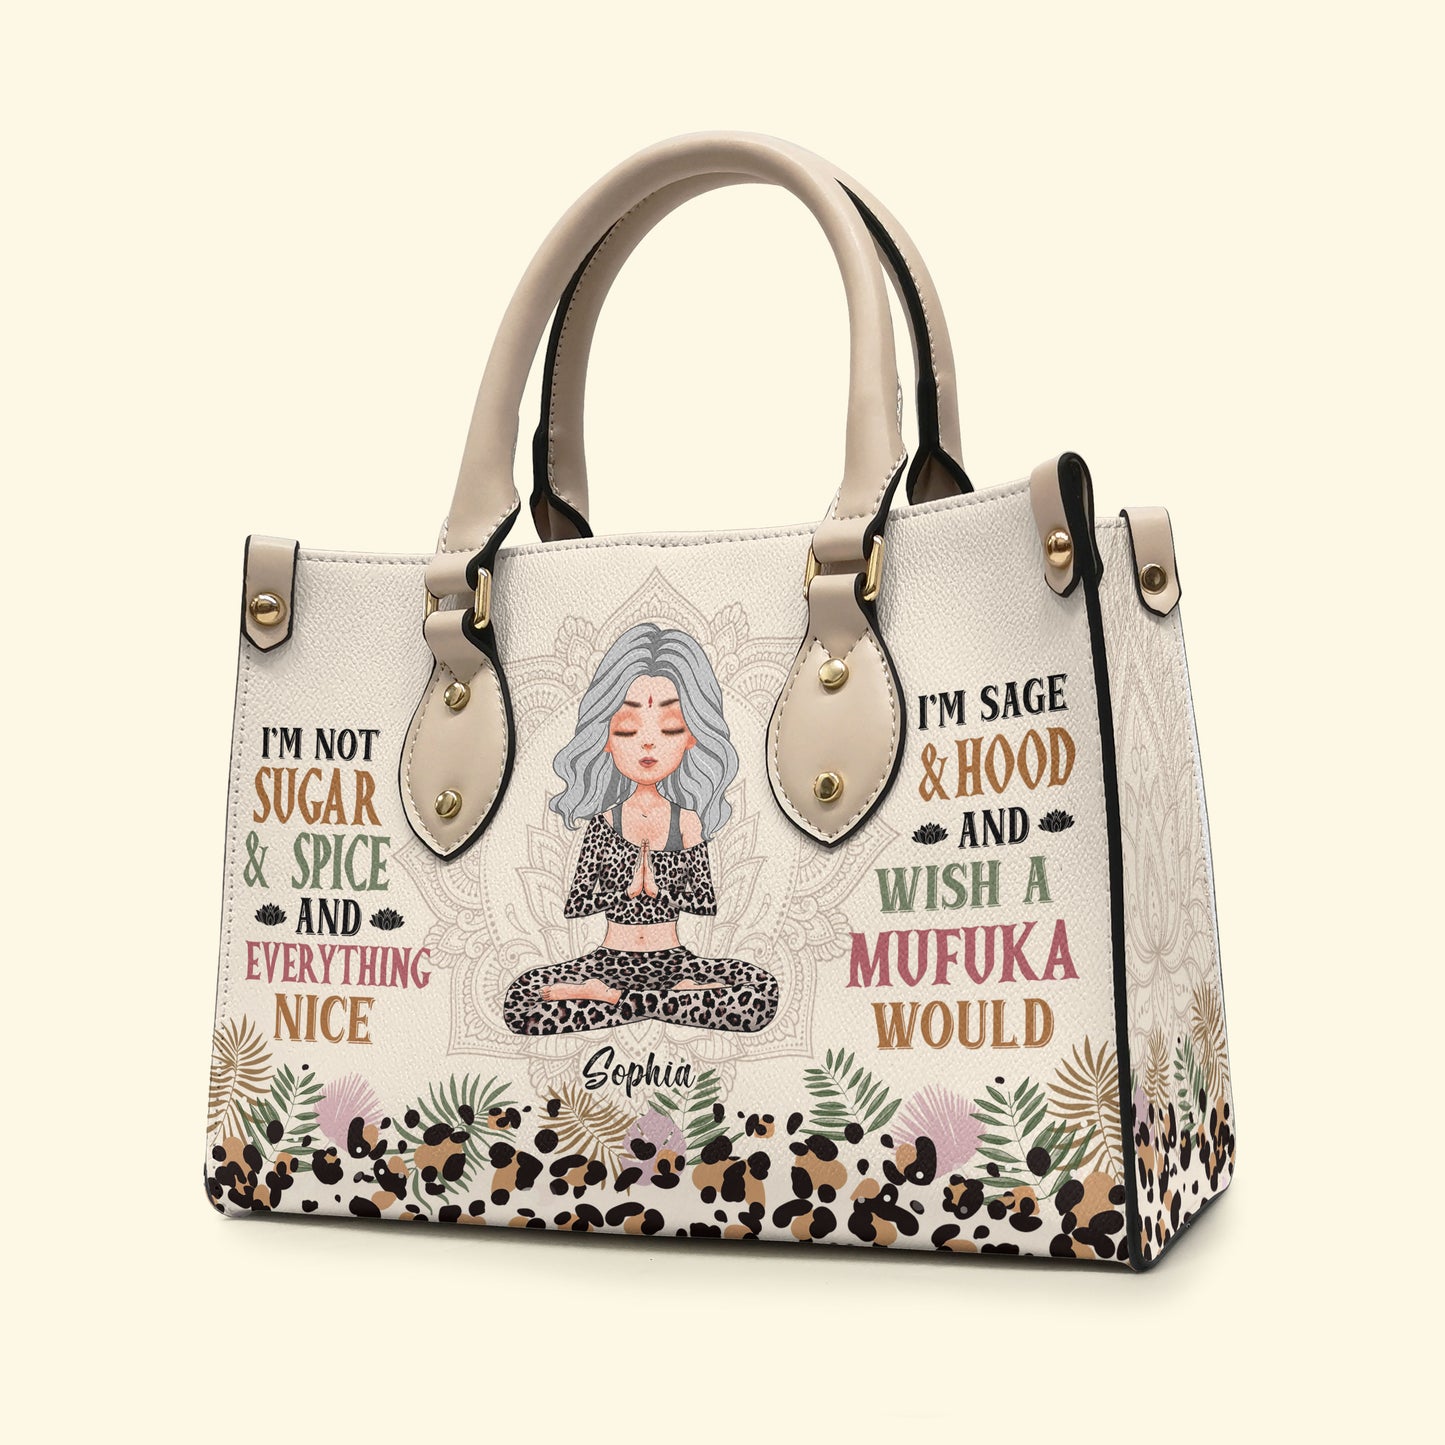 https://macorner.co/cdn/shop/products/IM-Not-Sugar-_-Spice-_-Everything-Nice-Personalized-Leather-Bag-Birthday-Gift-For-Yoga-girl-Yoga-lover-1_a6577041-0d20-469d-acac-1b3f071edb41.jpg?v=1658820989&width=1445